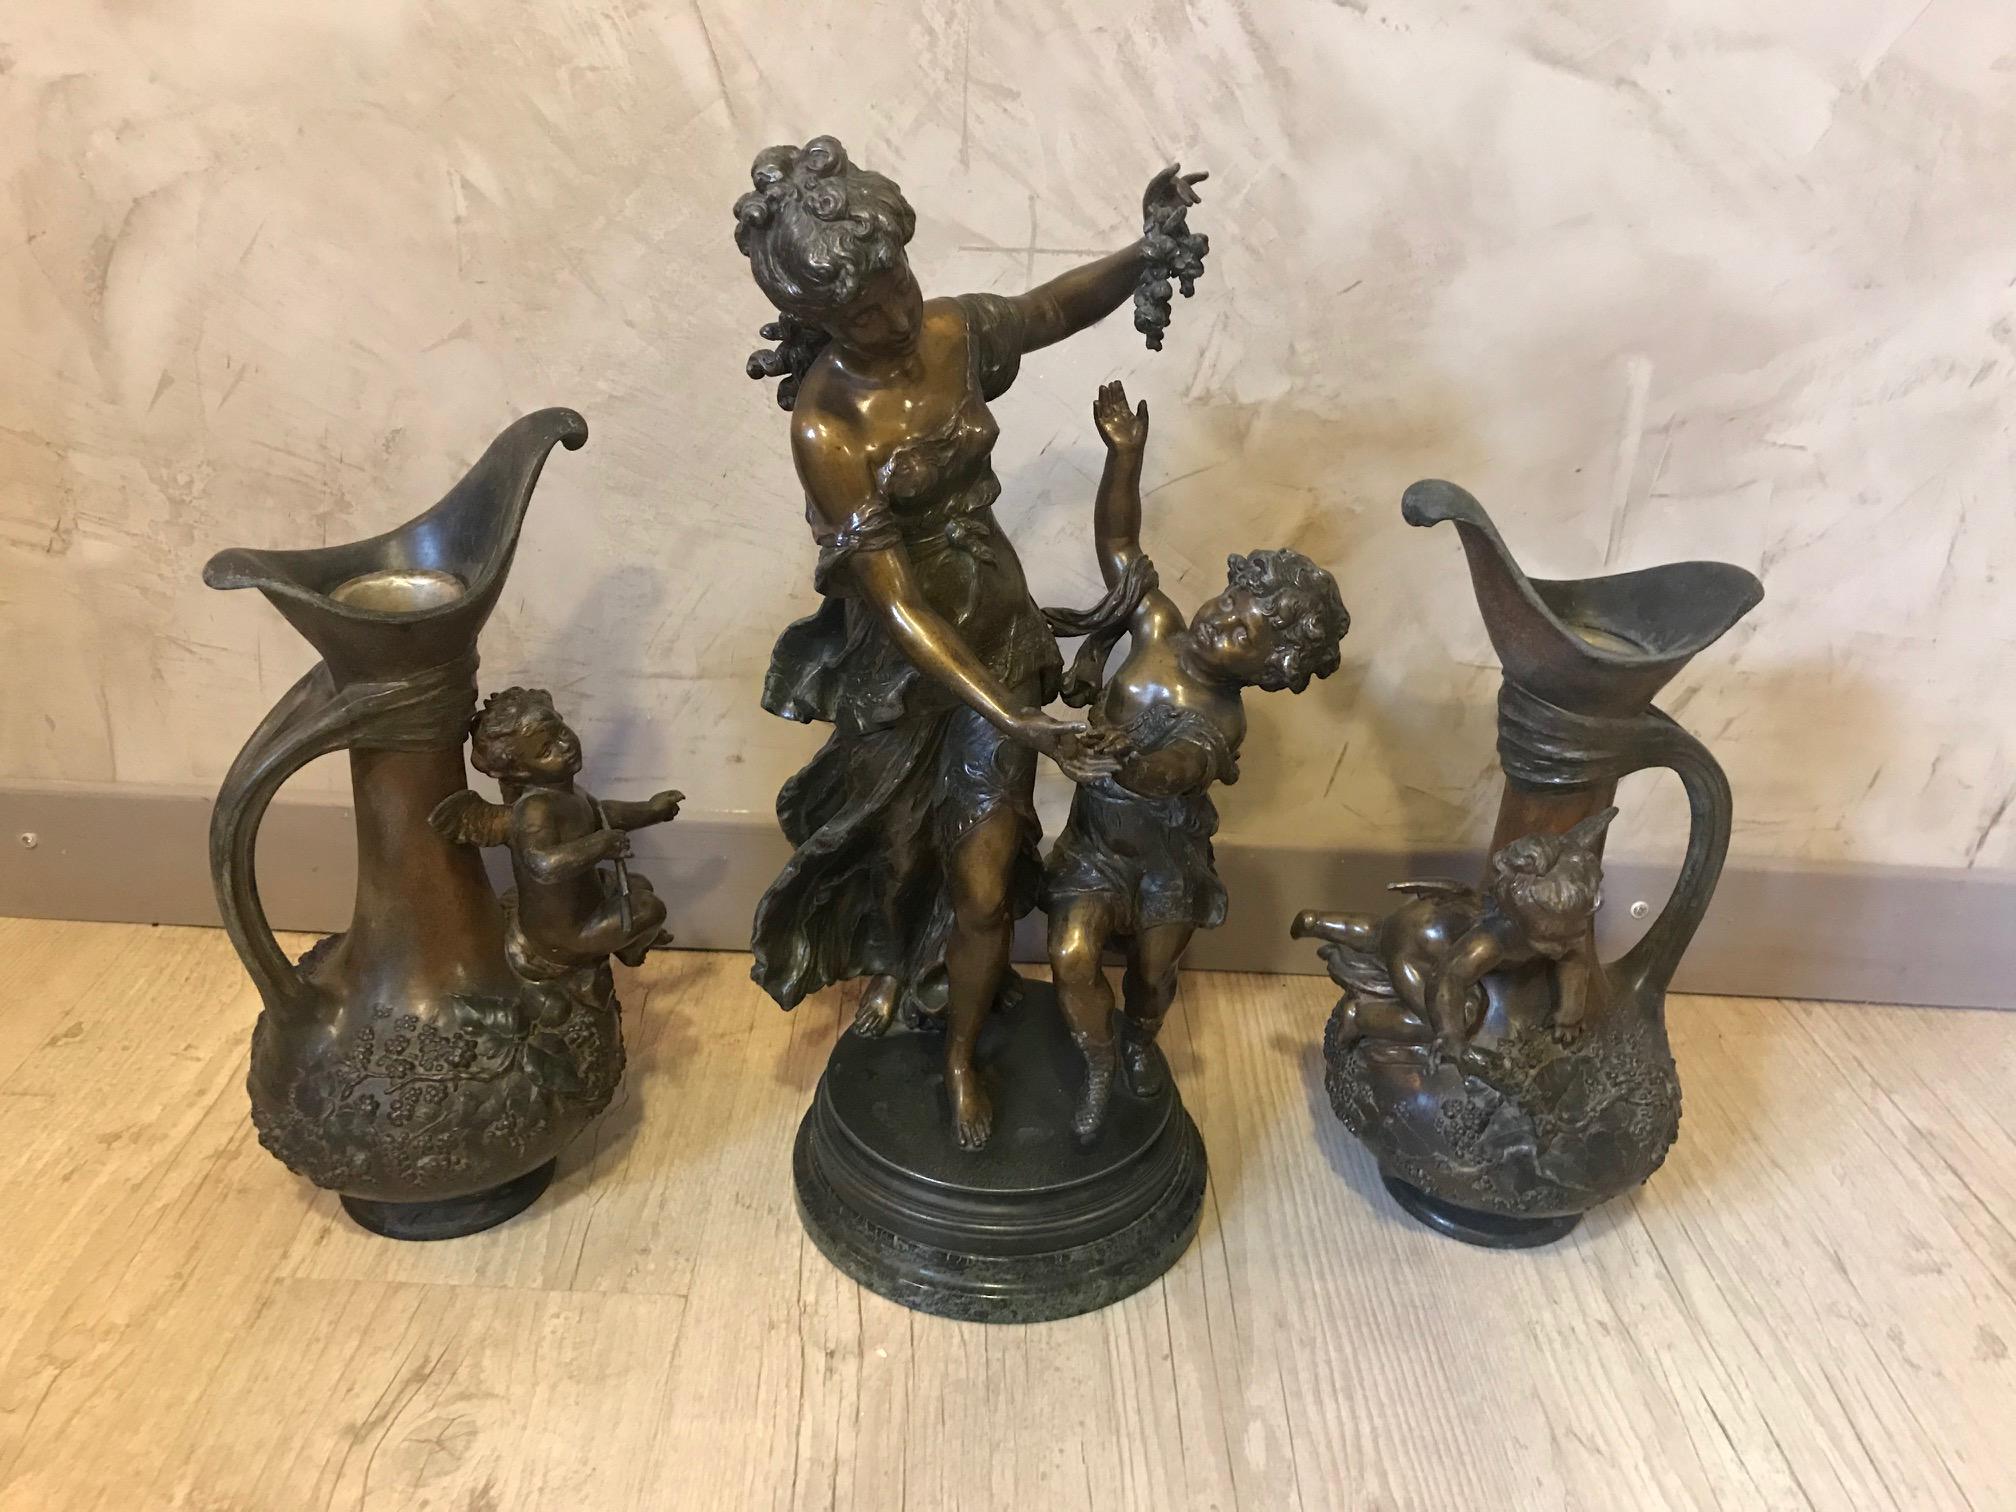 Very nice 20th century French Emile Bruchon Art Nouveau Spelter set of sculpture and two jars.
The large sculpture is representing a women with his children holding a grape in her hand on a marble base (there is a small damage on the marble